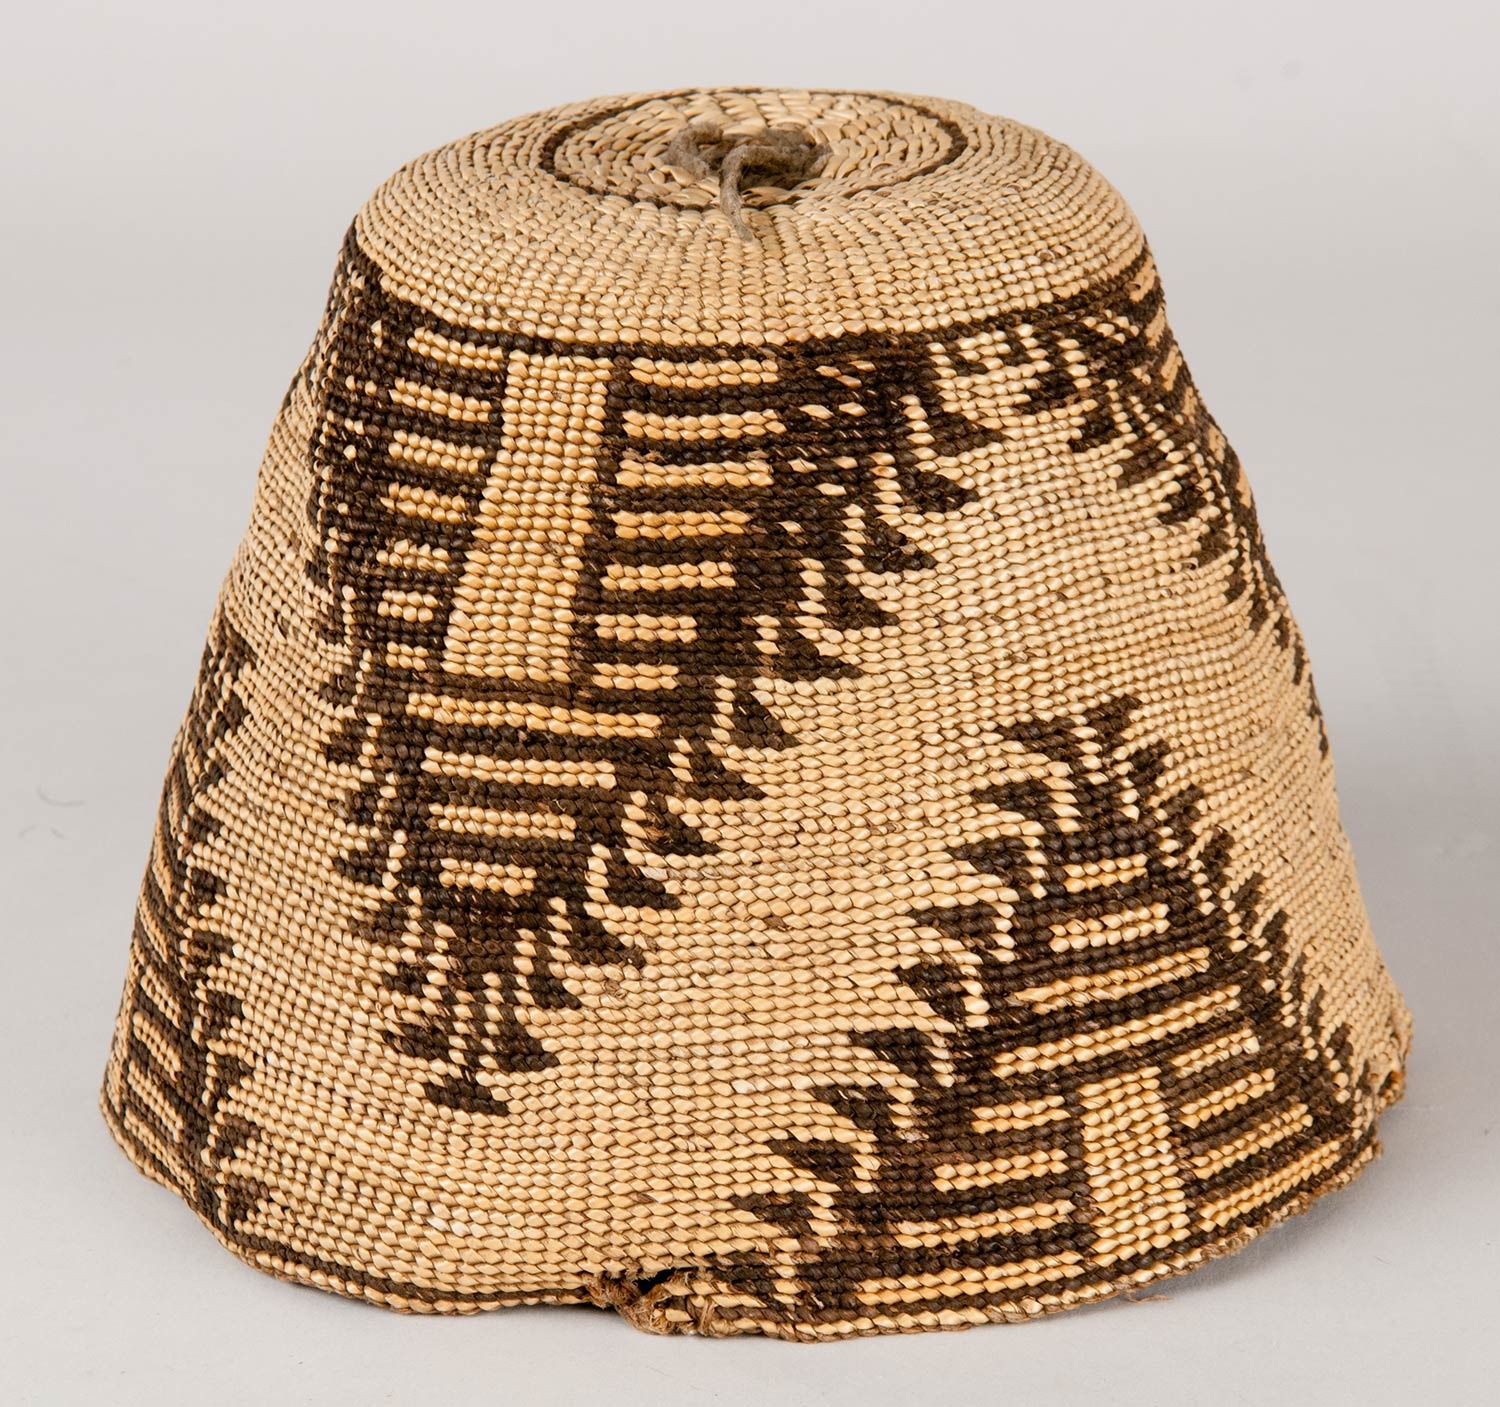 Subconical shaped basket hat made from hemp and beargrass. Designs on the hat feature a three part separated pyramid with horizontal banding on the interior in orange and dark brown.